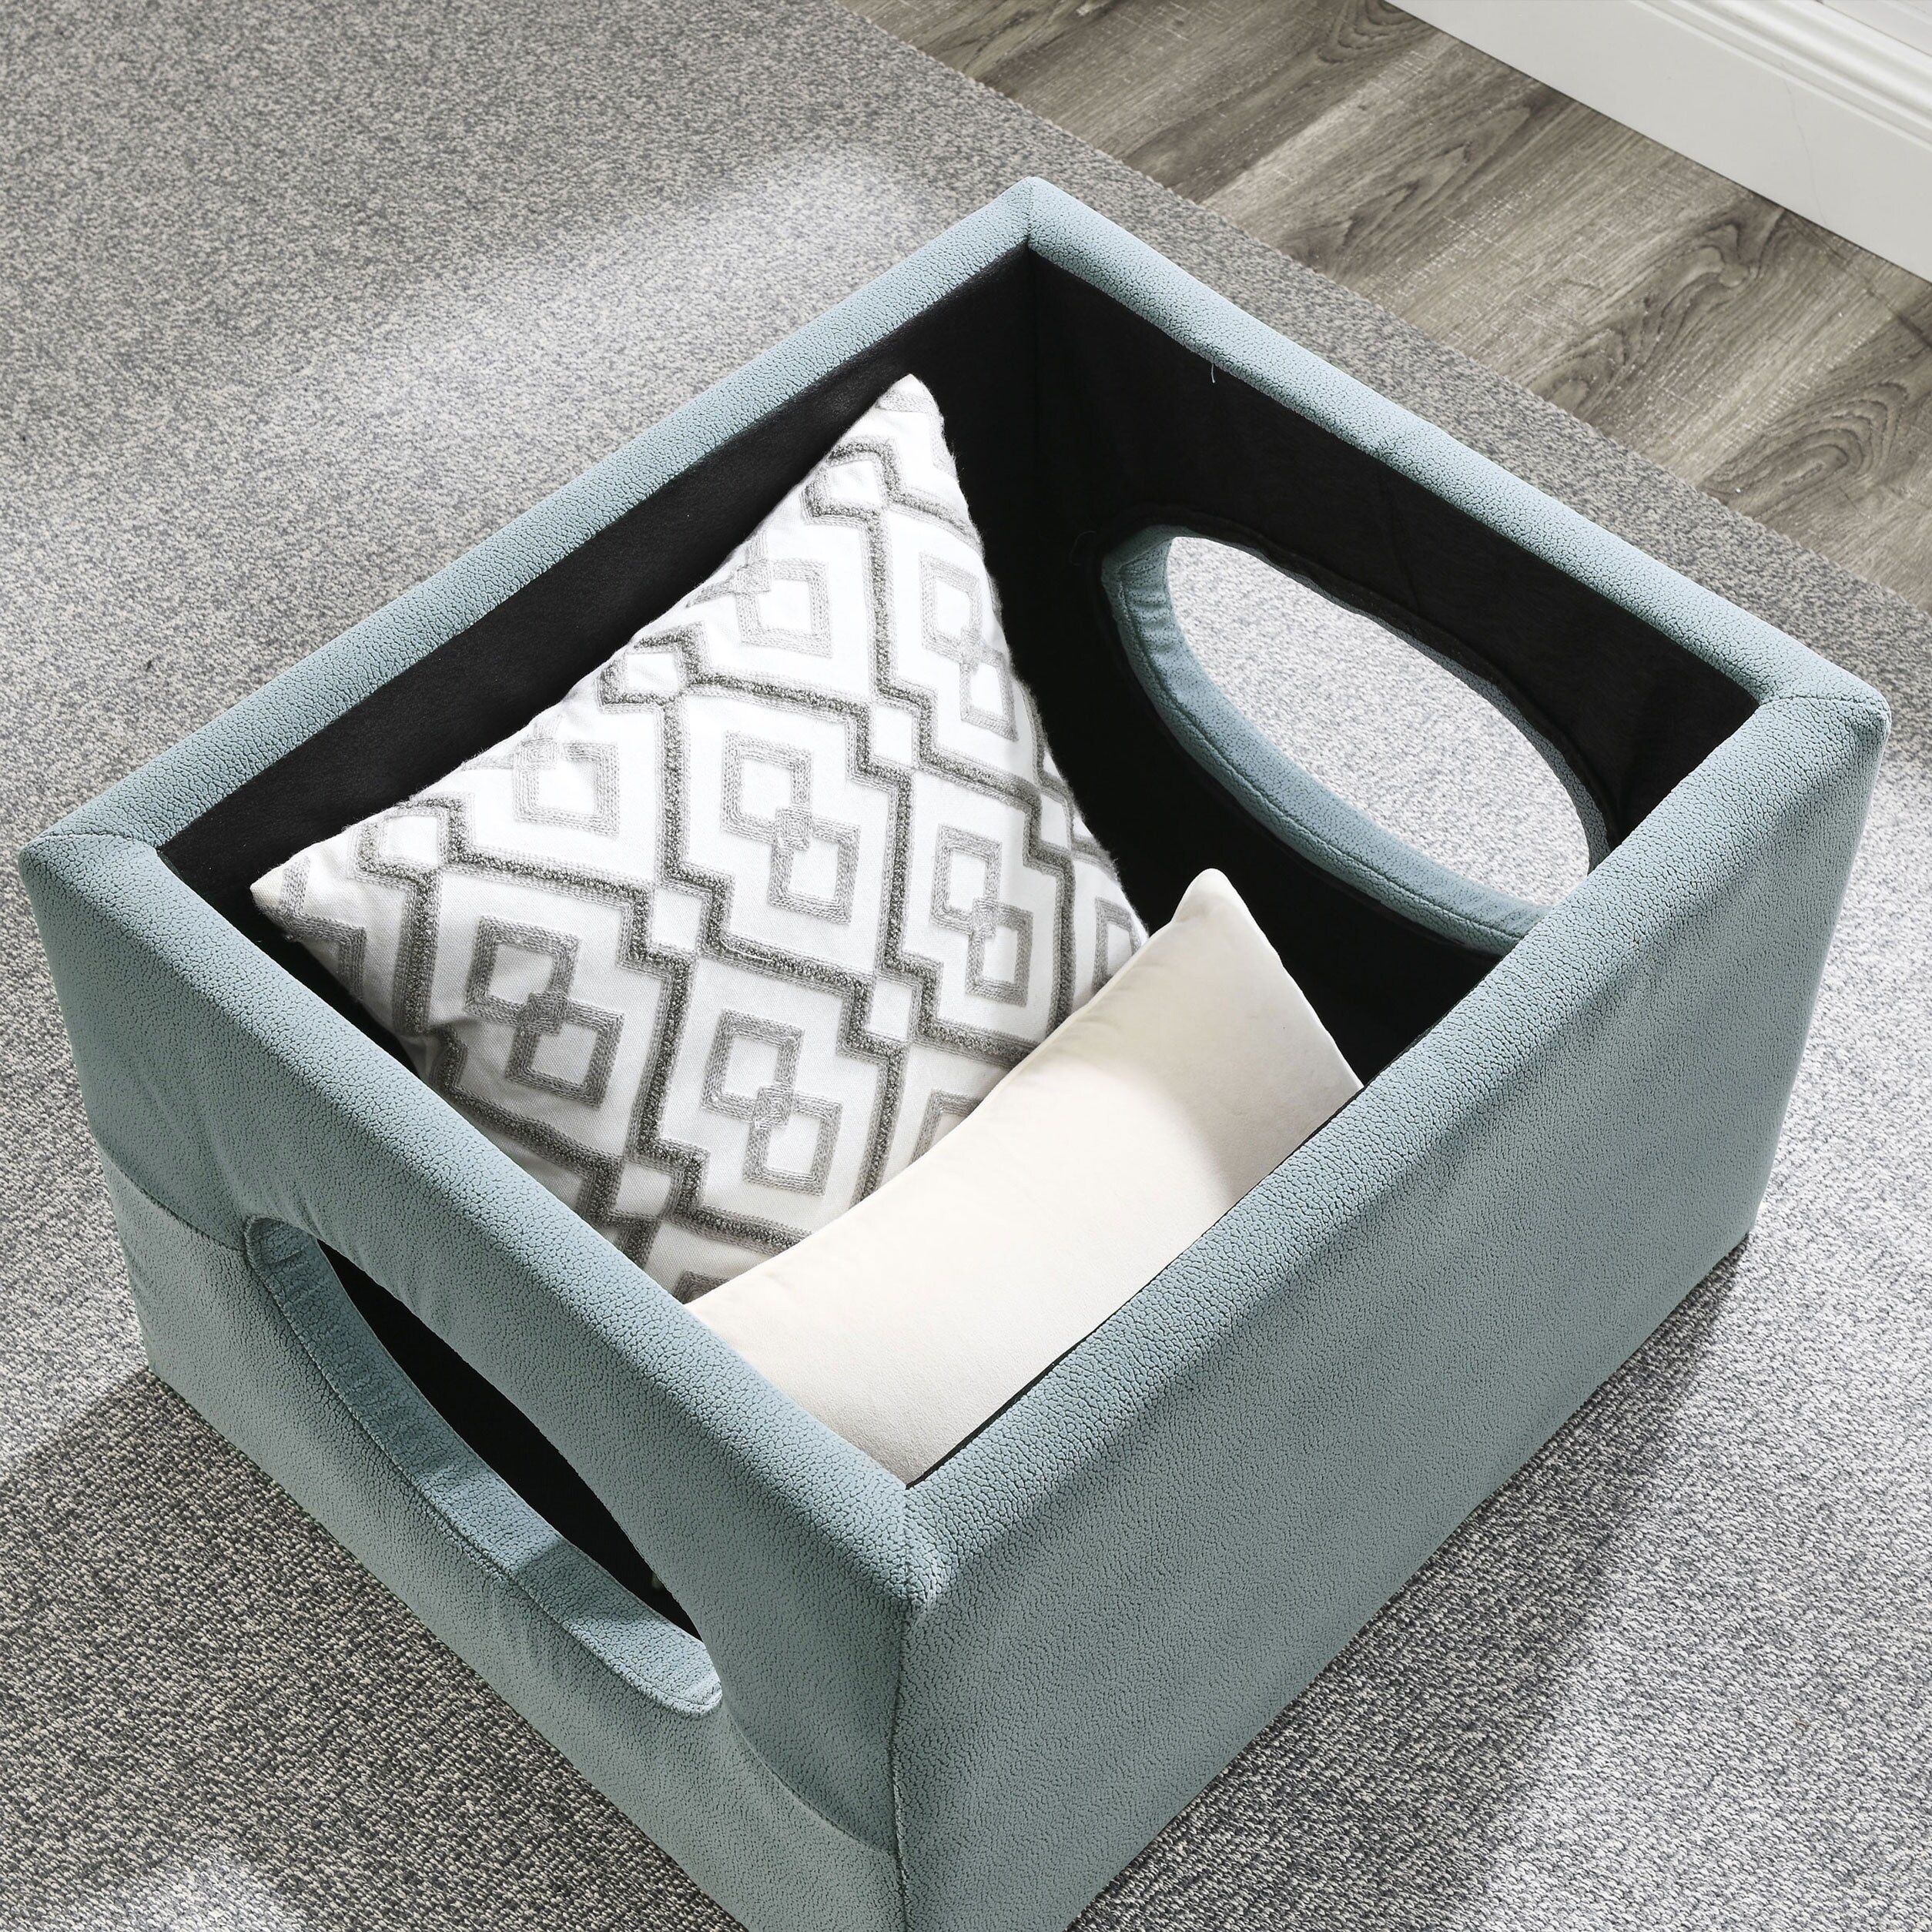 Modern design hollow storage ottoman,two small footstools,Grey